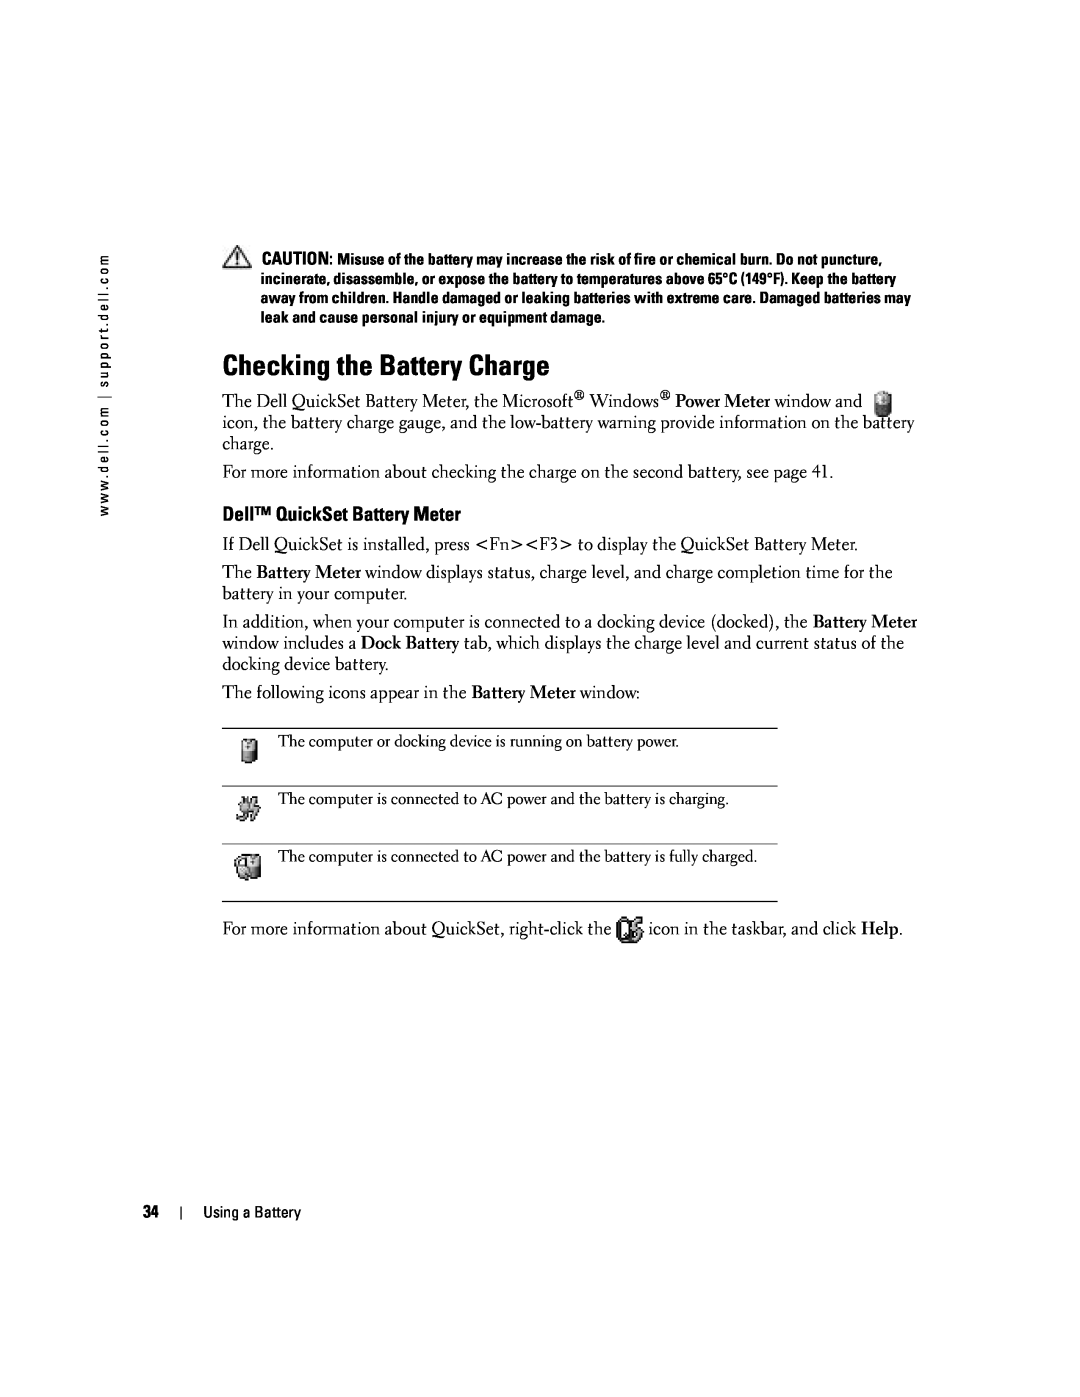 Dell PP10L owner manual Checking the Battery Charge, Dell QuickSet Battery Meter 